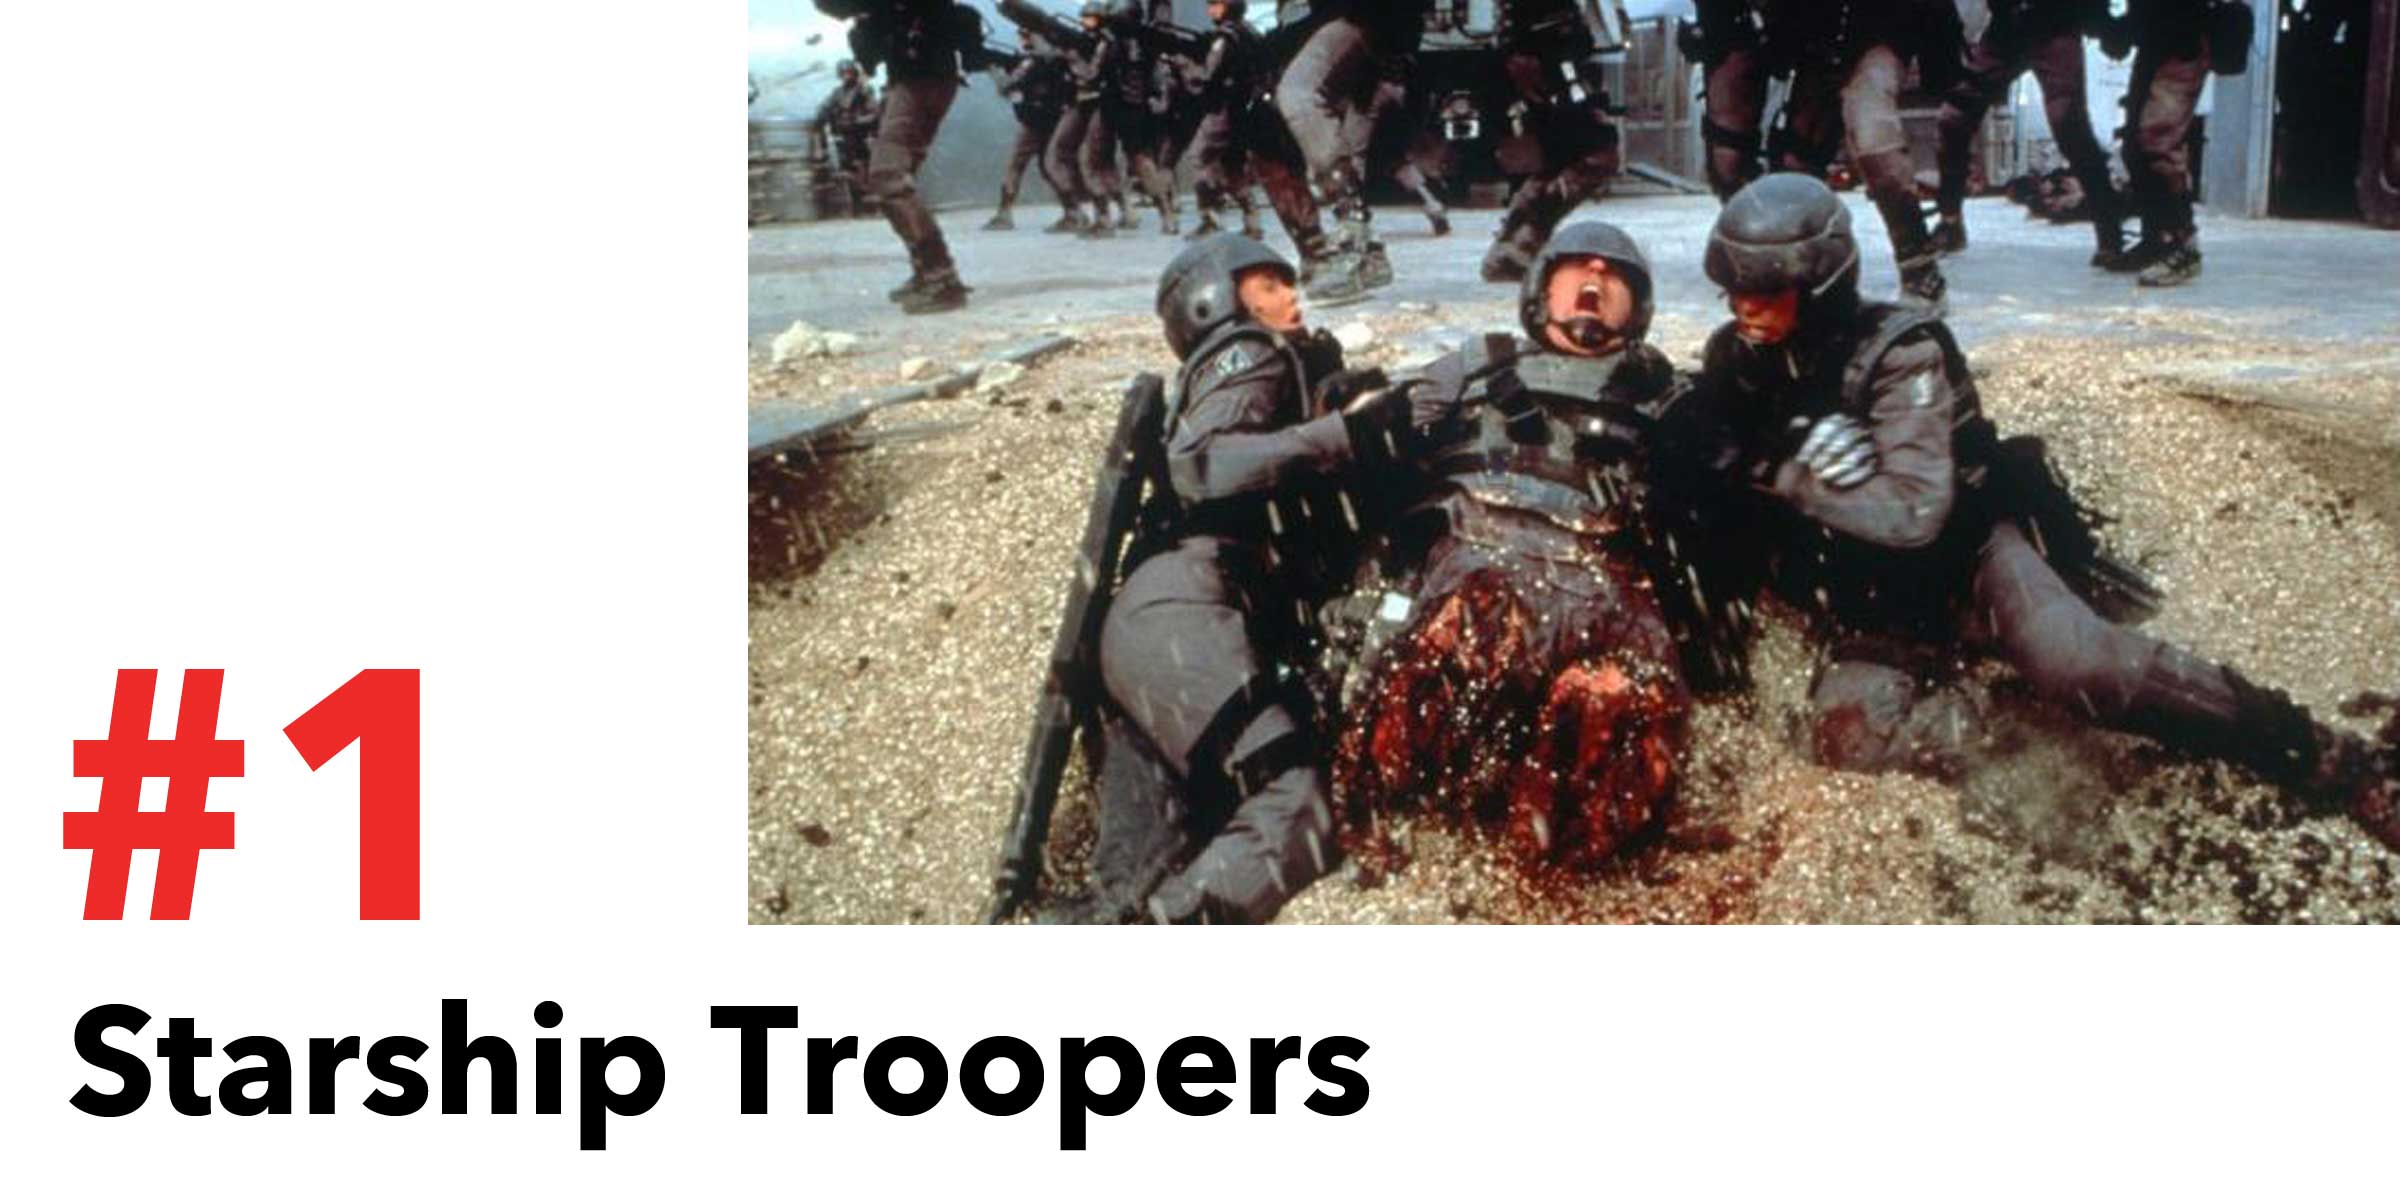 Starship Troopers is #1 in the Top 10 Post Apocalyptic Movies on Netflix. Pictured, a soldier with severed legs is dragged to safety.